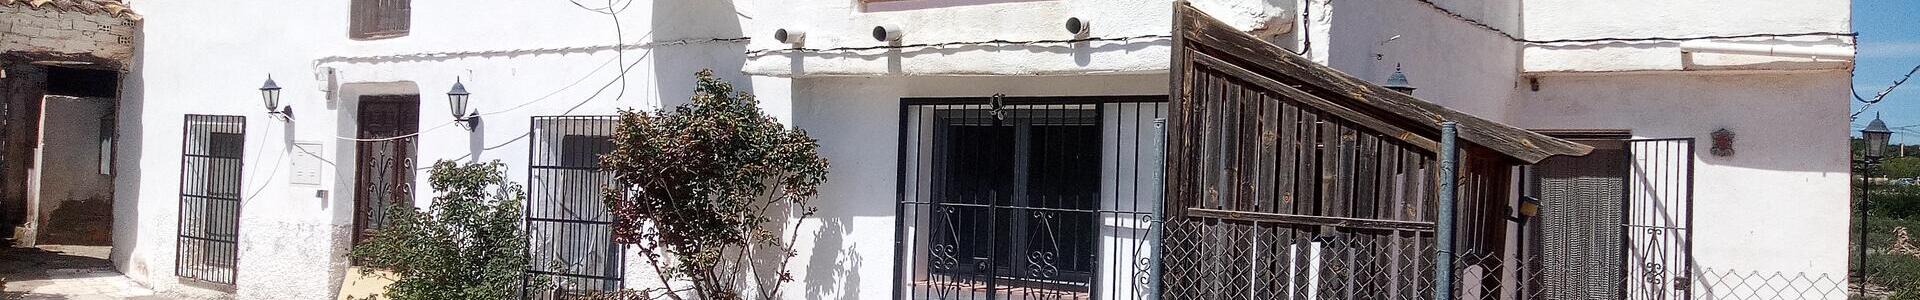 130-1354: 3 Bedroom Cortijo: Traditional Cottage for Sale